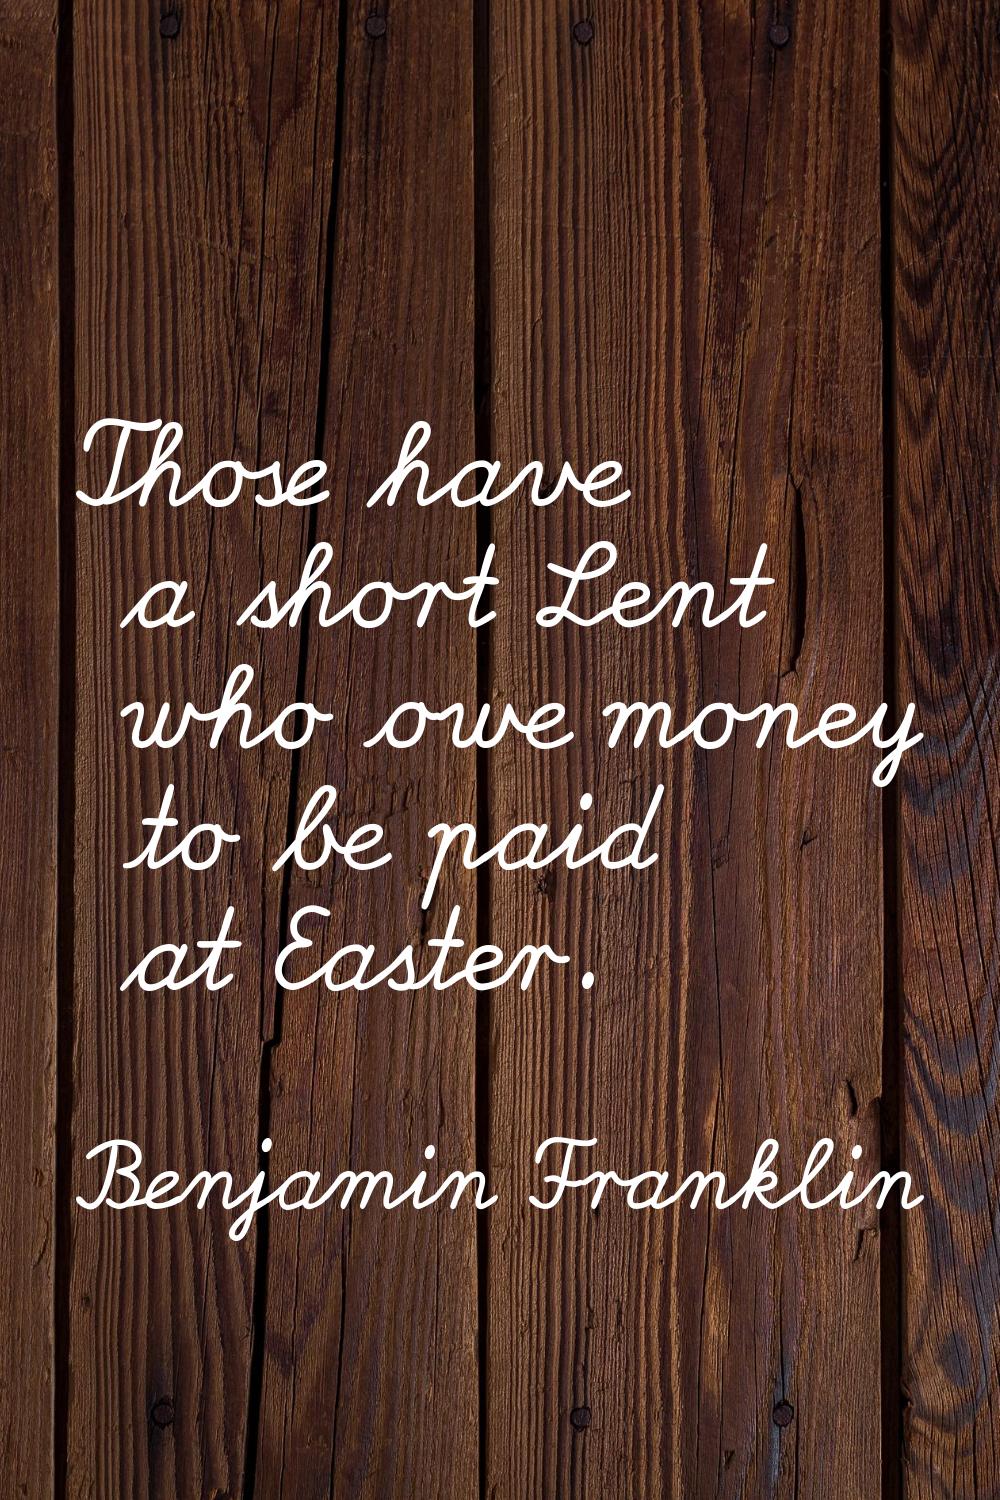 Those have a short Lent who owe money to be paid at Easter.